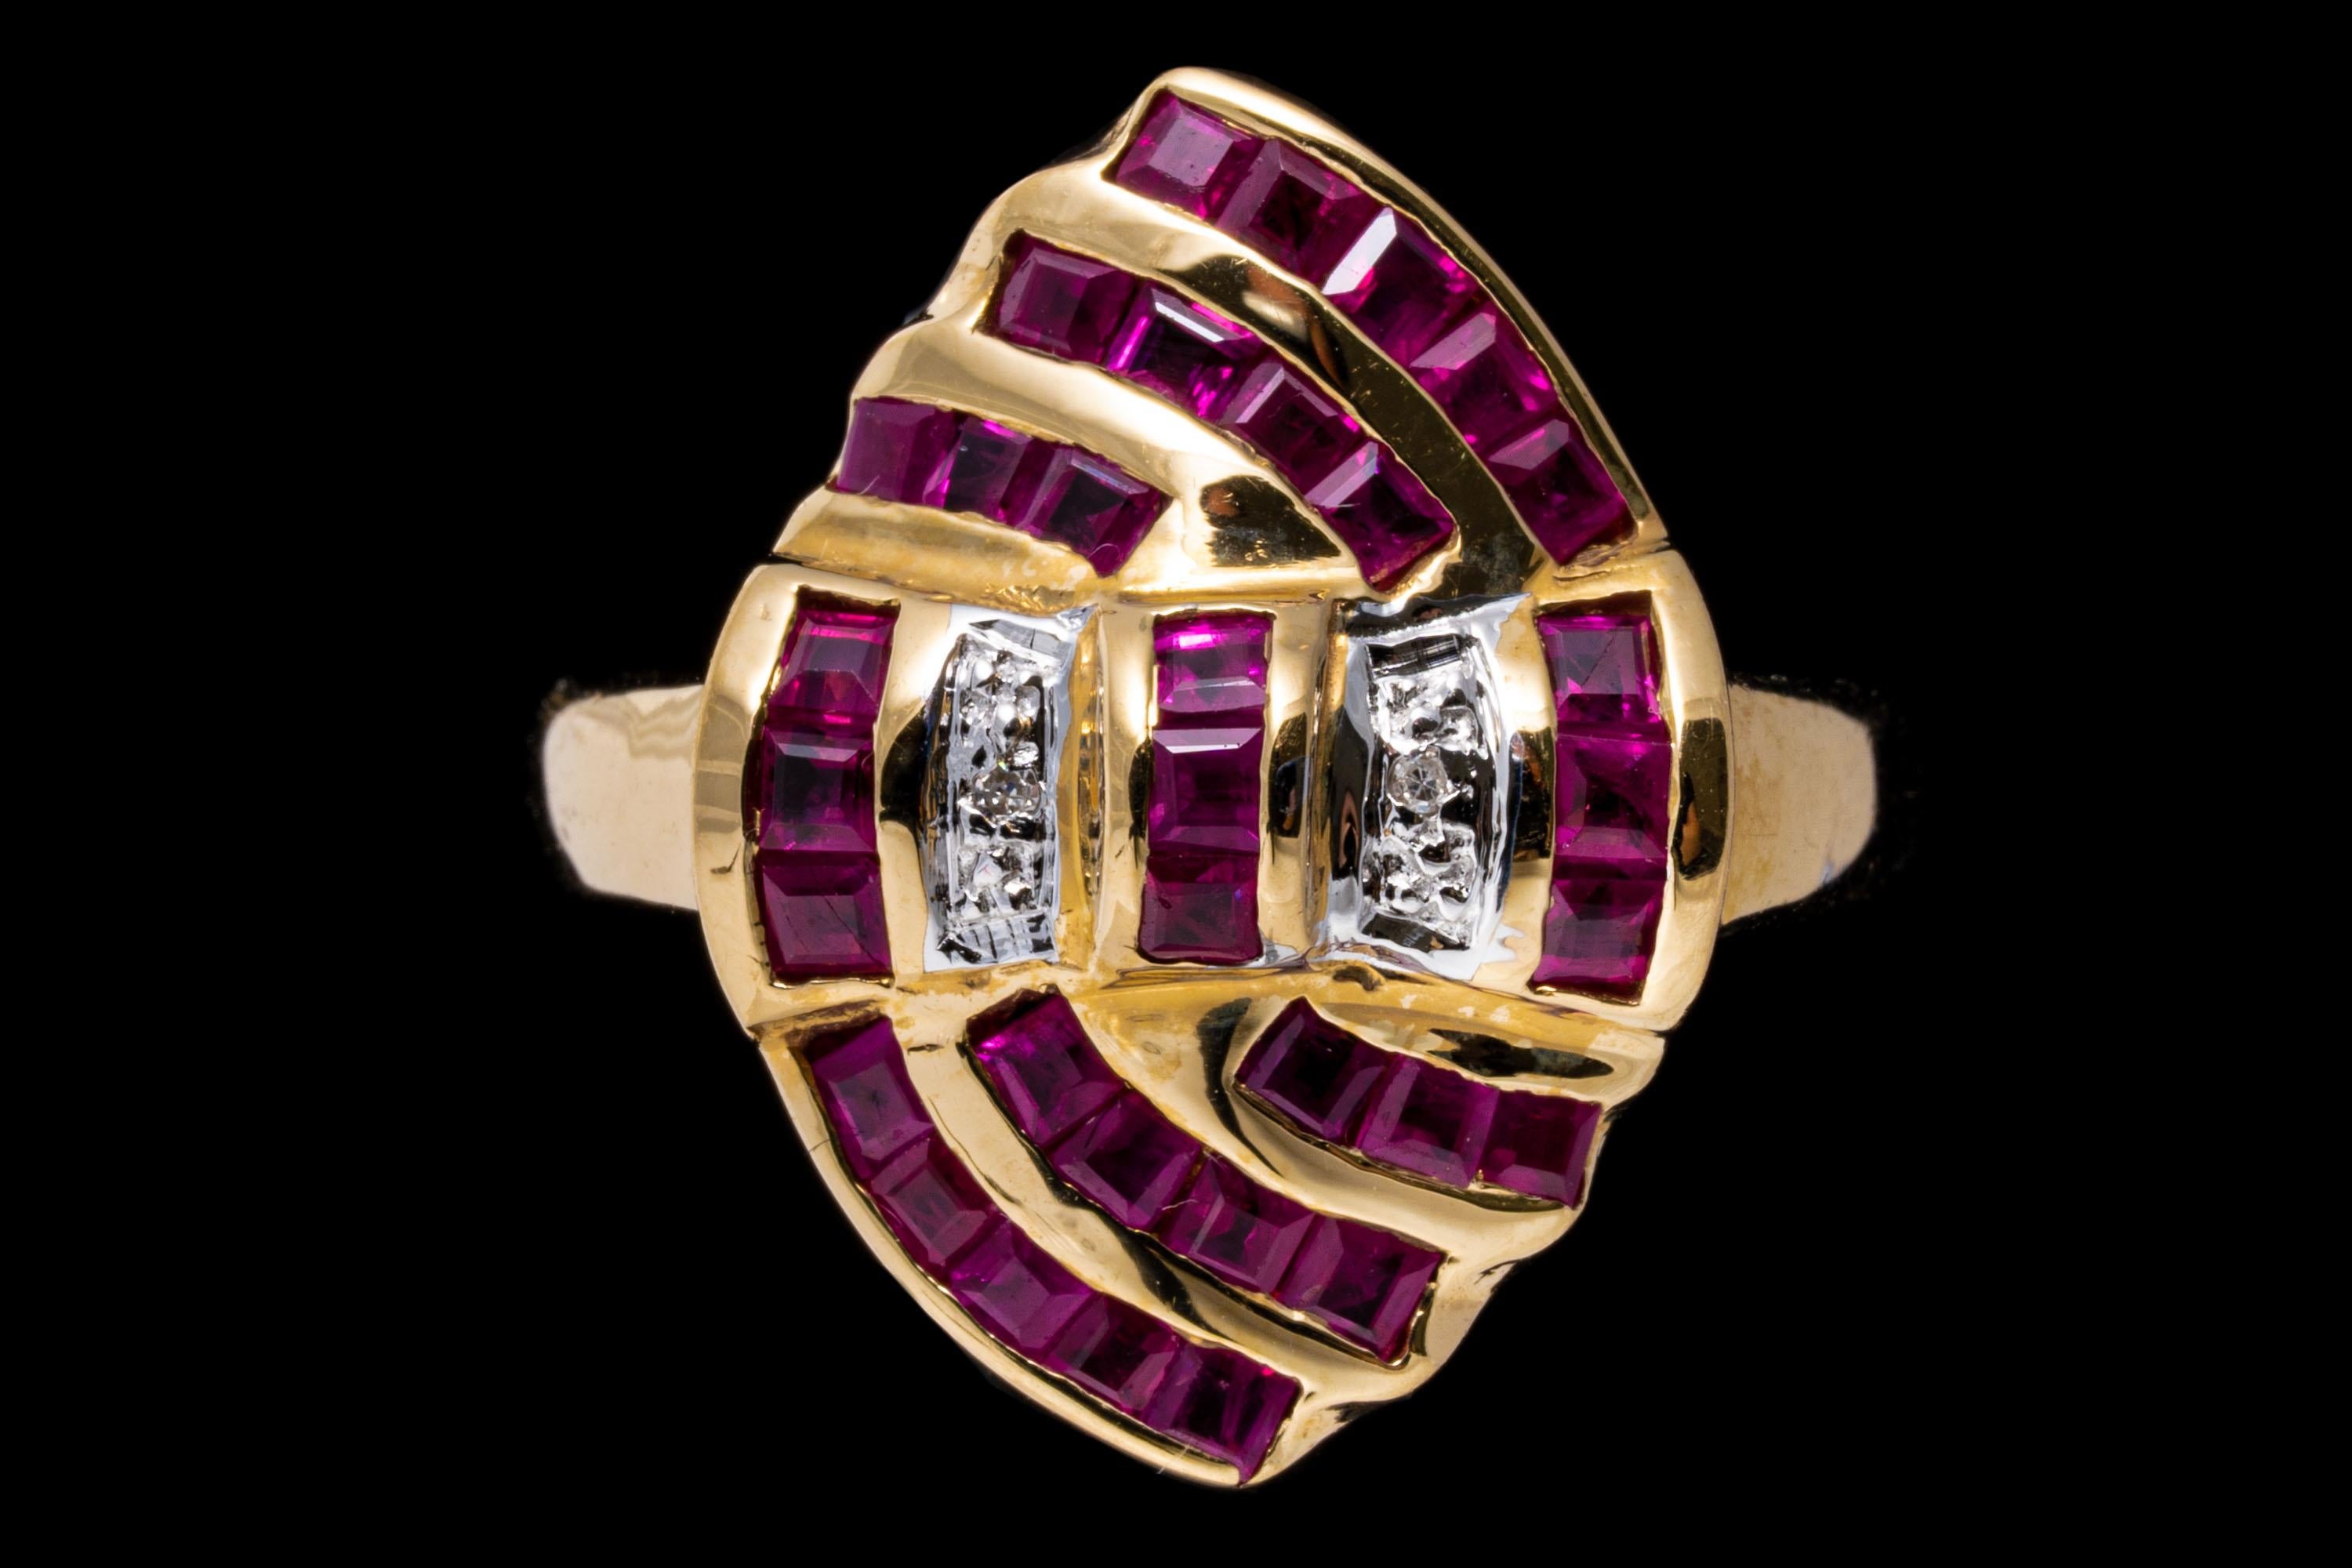 14k yellow gold ring. This unique navette shaped ring, decorated with channel set swirls of square faceted, medium to light reddish pink color rubies, approximately 1.14 TCW, highlighted with two accent diamonds.
Marks: 14k 
Dimensions: 1/2